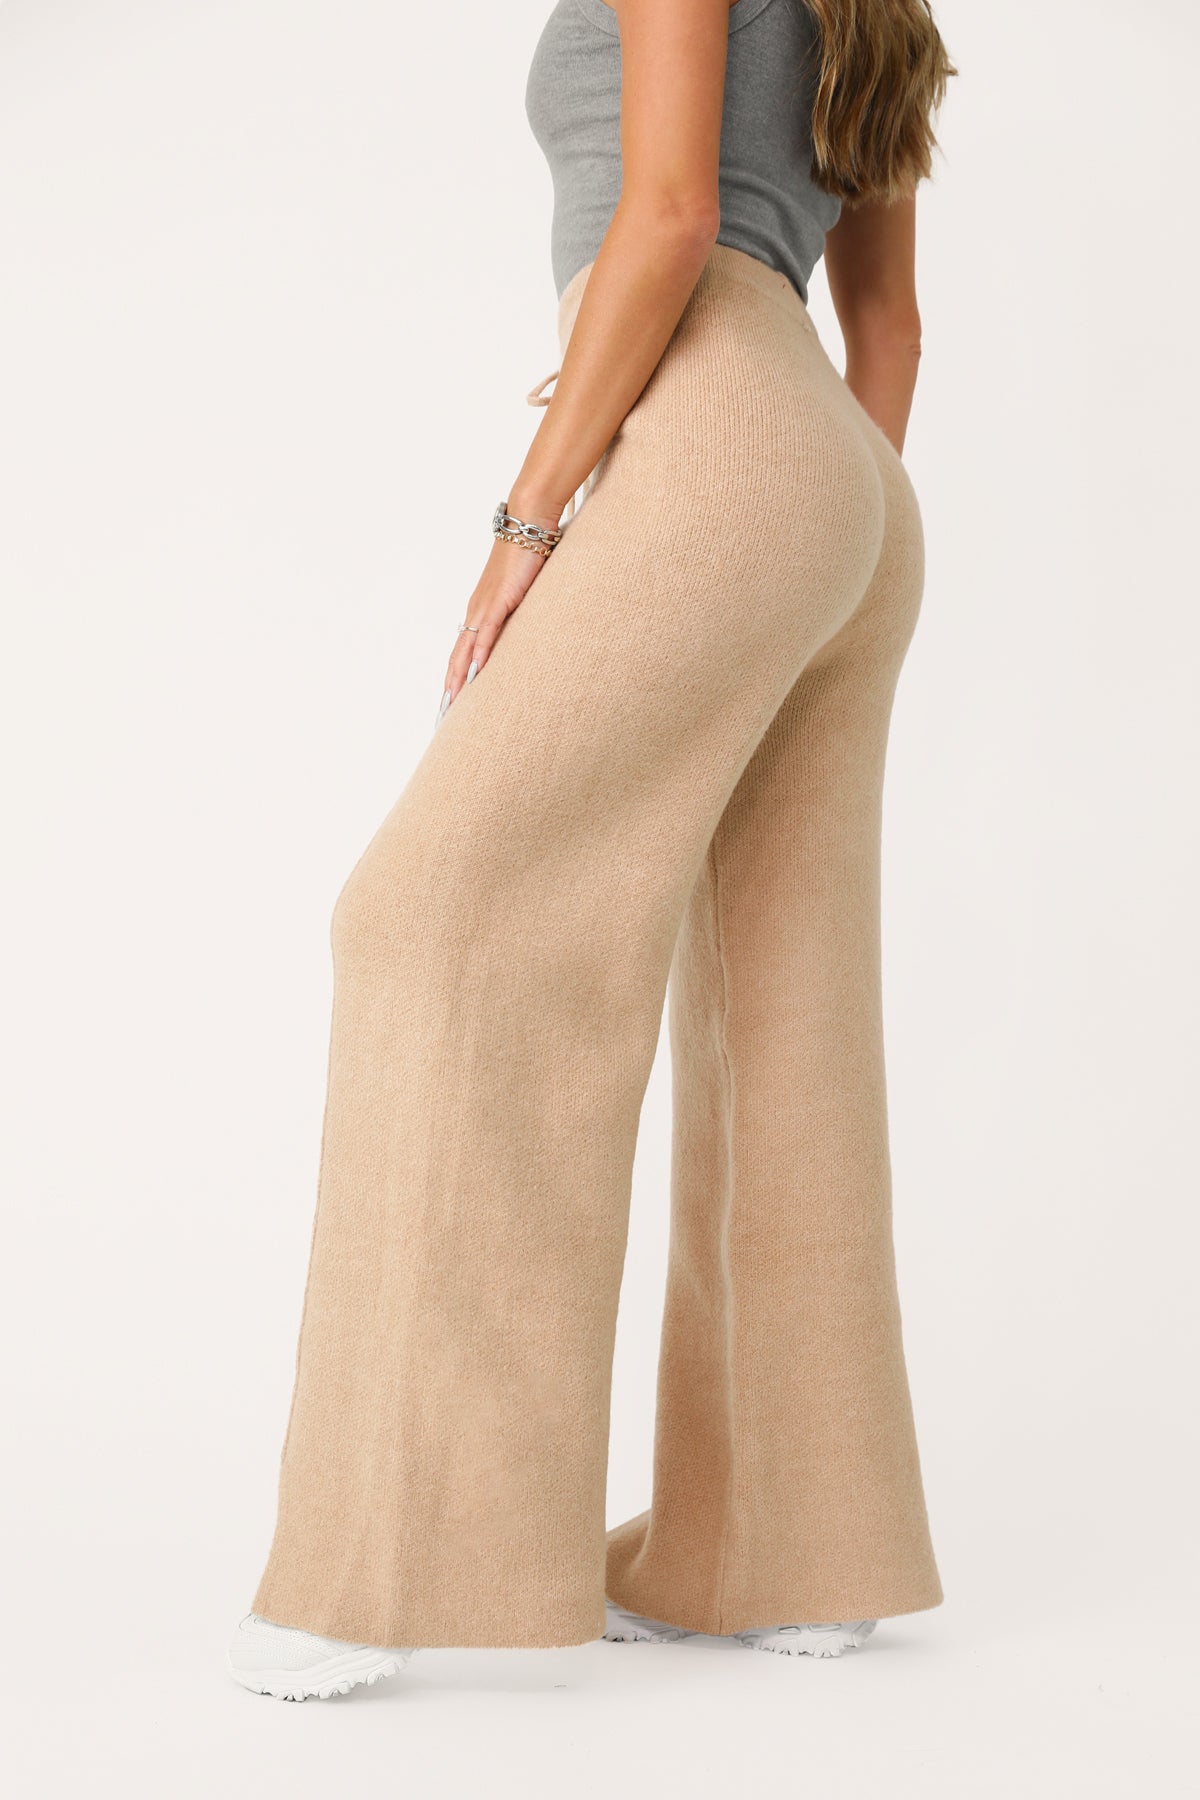 MODEL WEARING THE OATMEAL SWEATER PANT